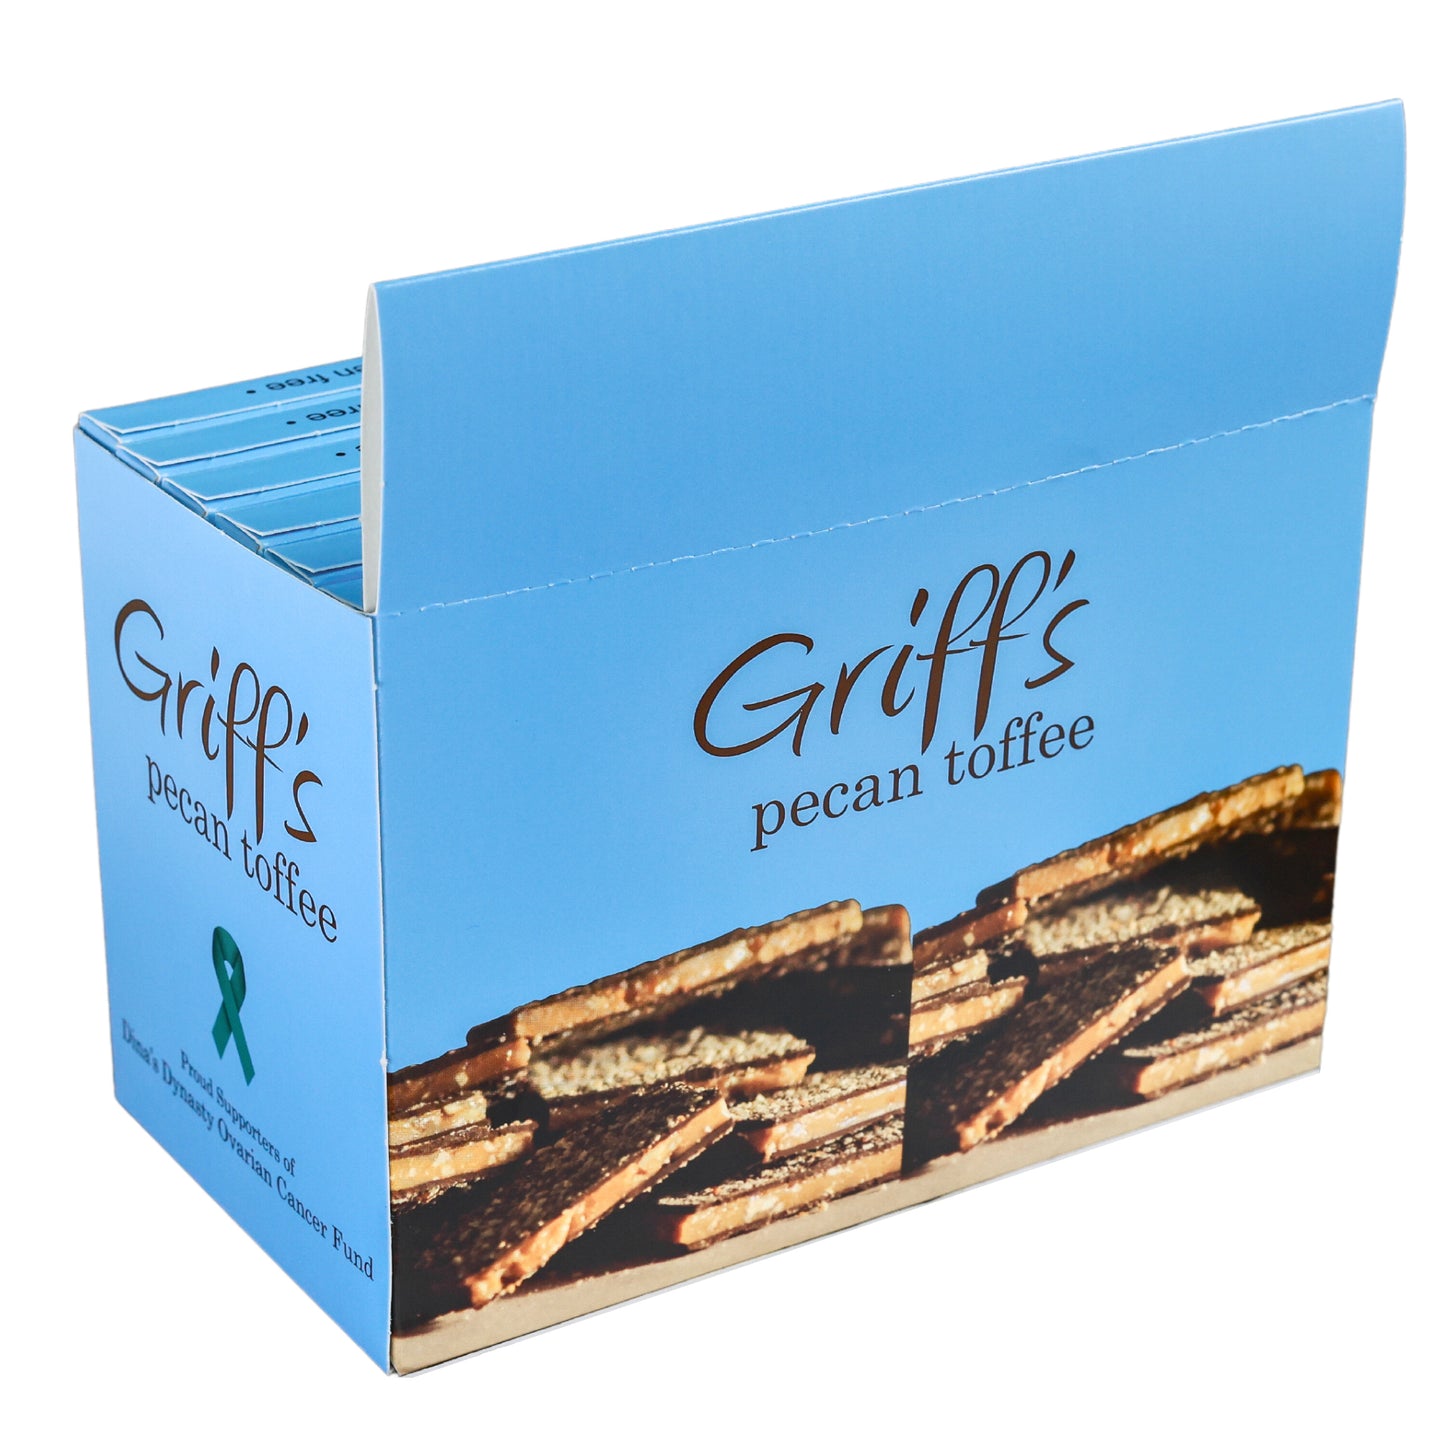 2 oz Griff's Pecan Toffee 12 Pack